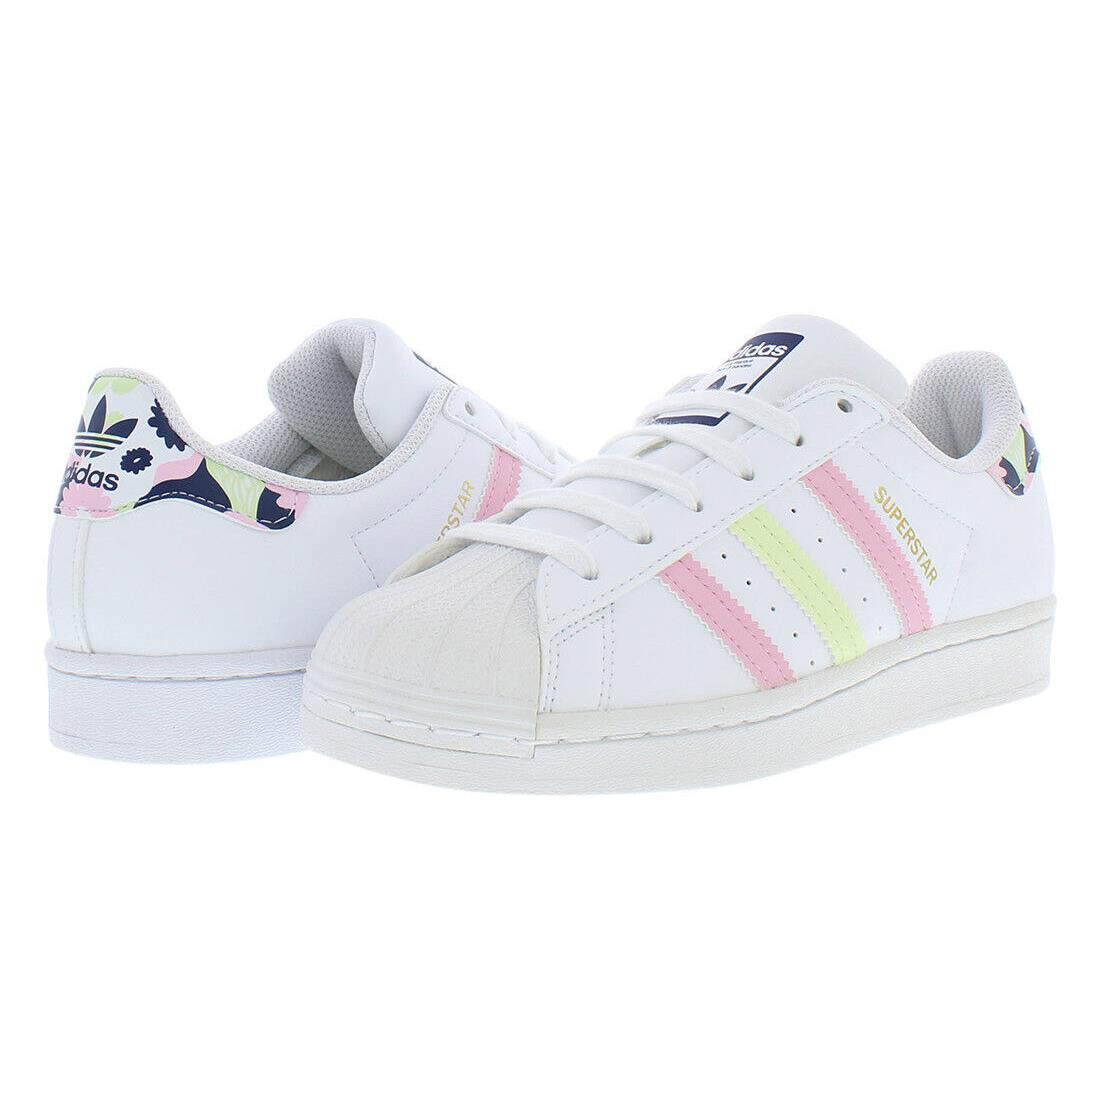 Adidas Superstar Boys Shoes - White/Pink, Main: White